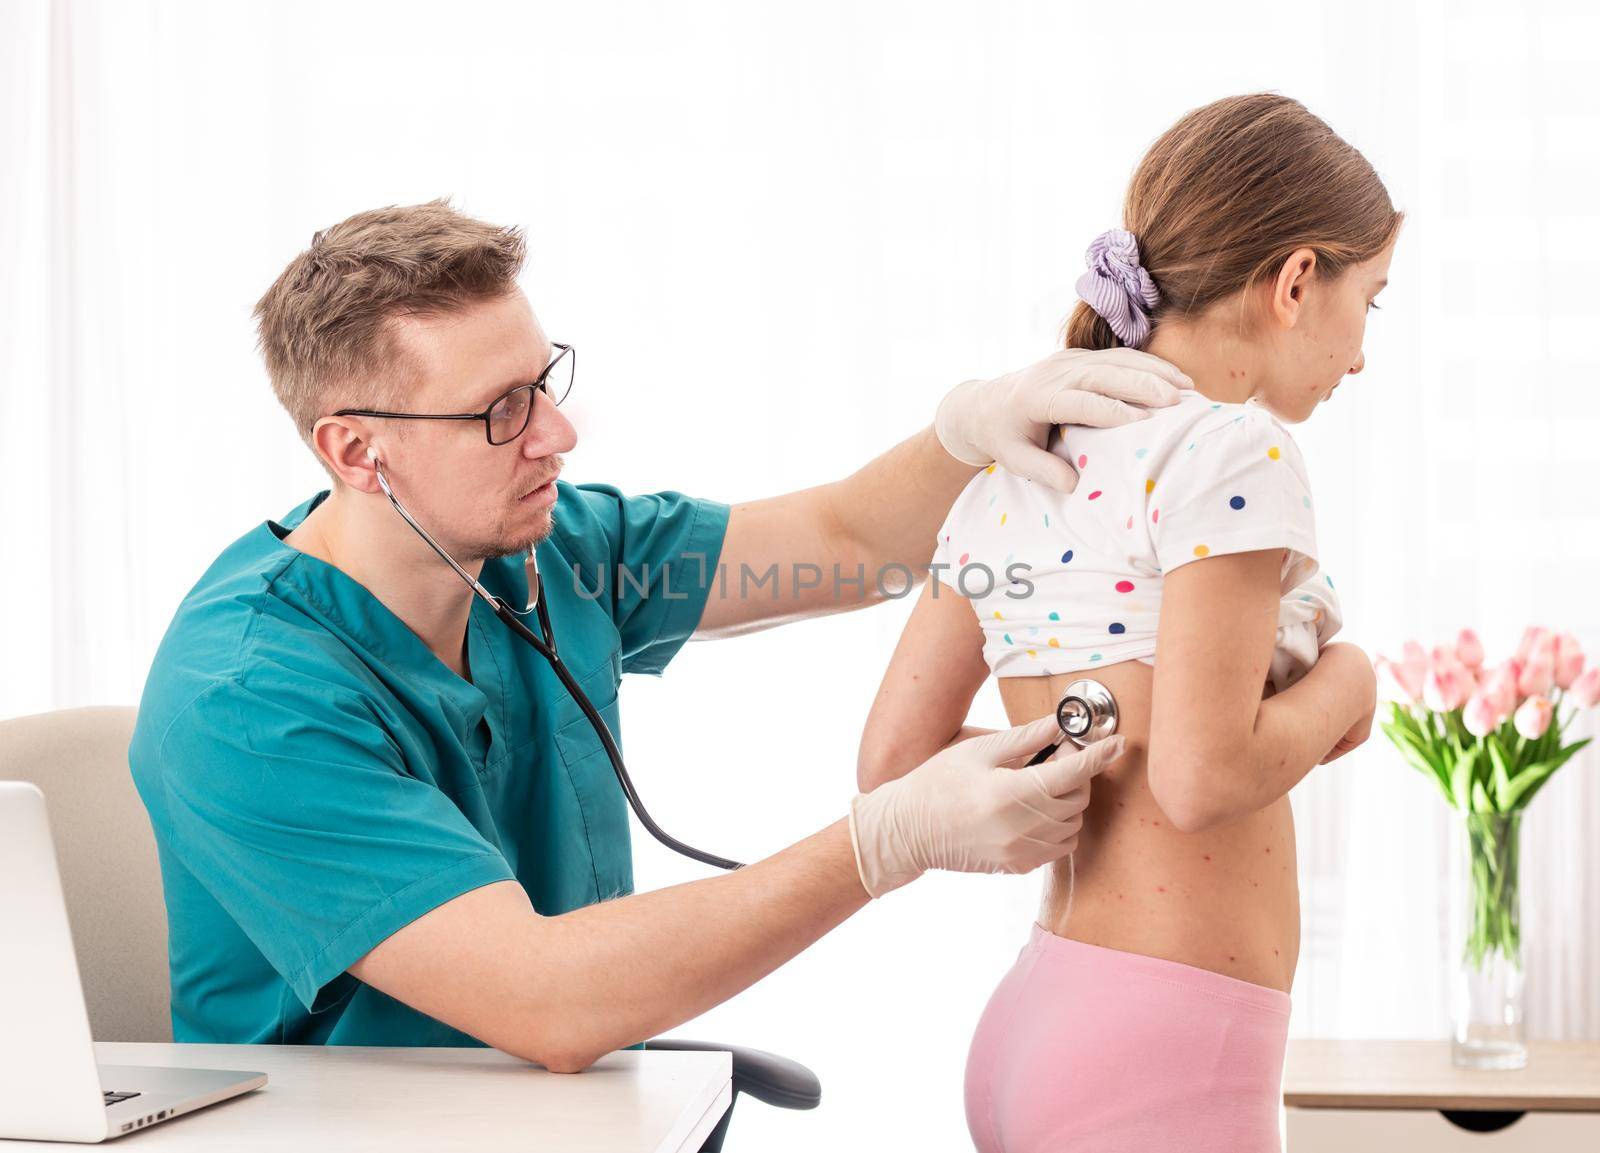 Doctor in the uniformm checking health status of a girl with stethoscope, on white background